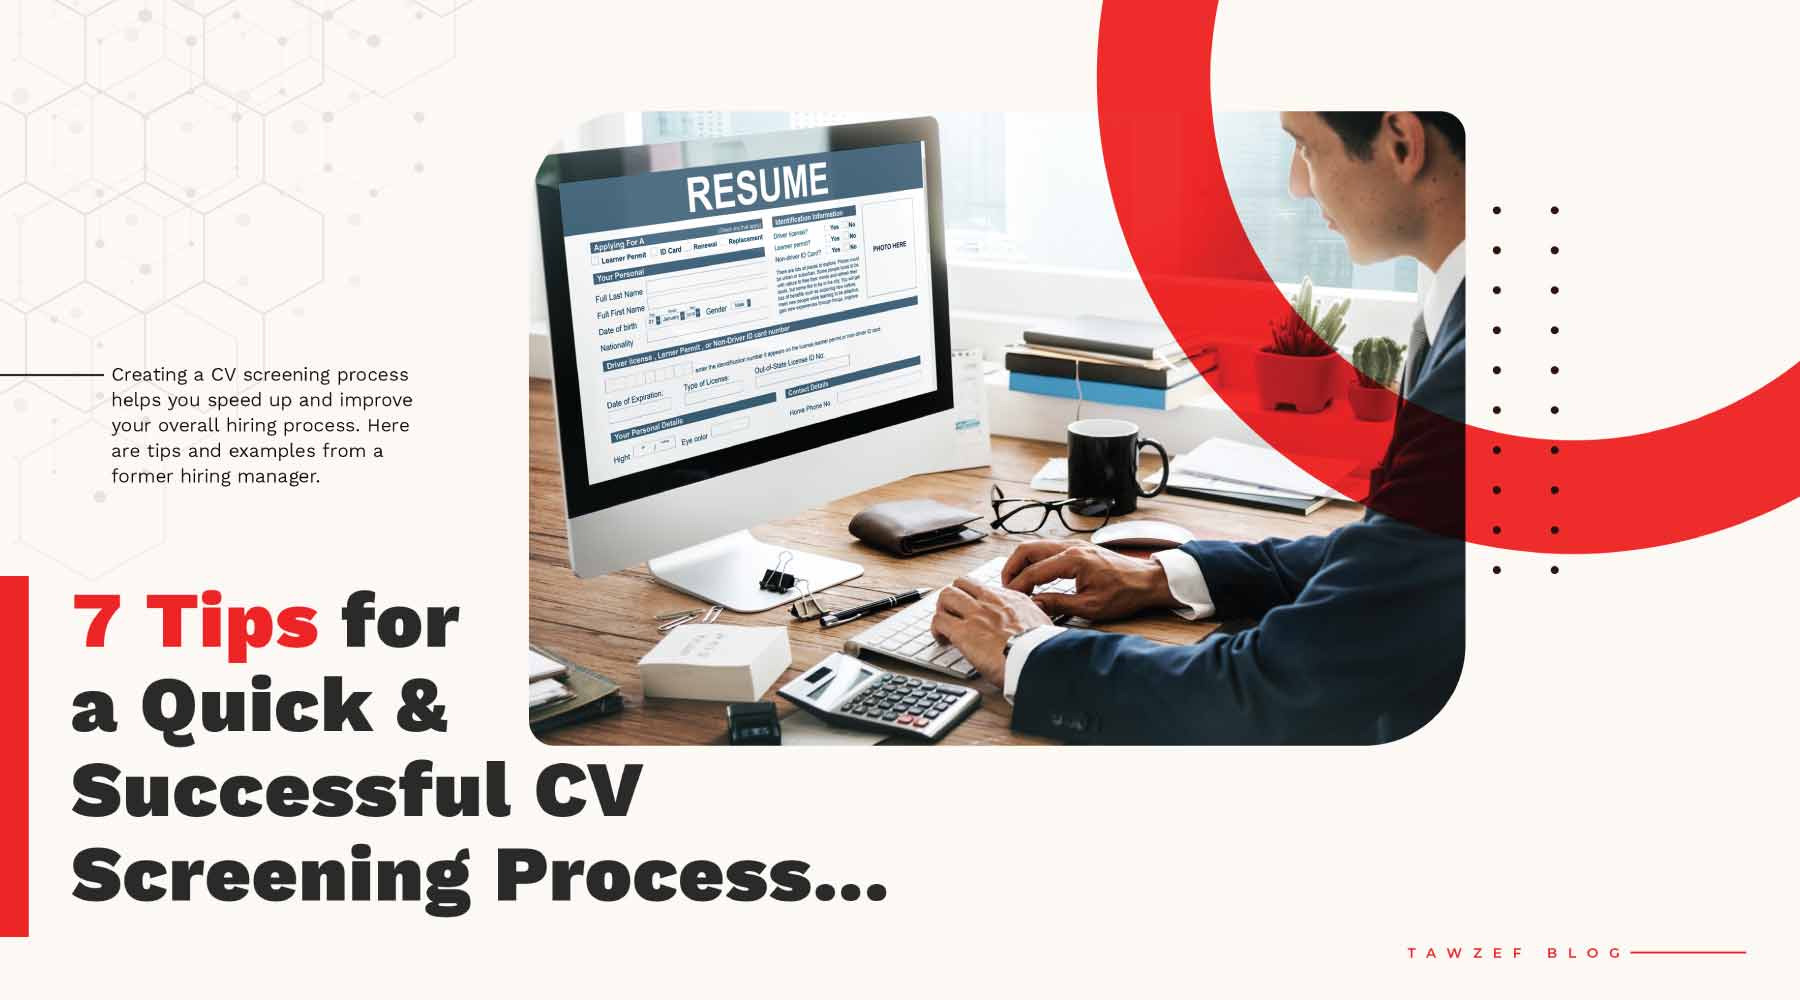 7 tips for a quick and successful CV screening process